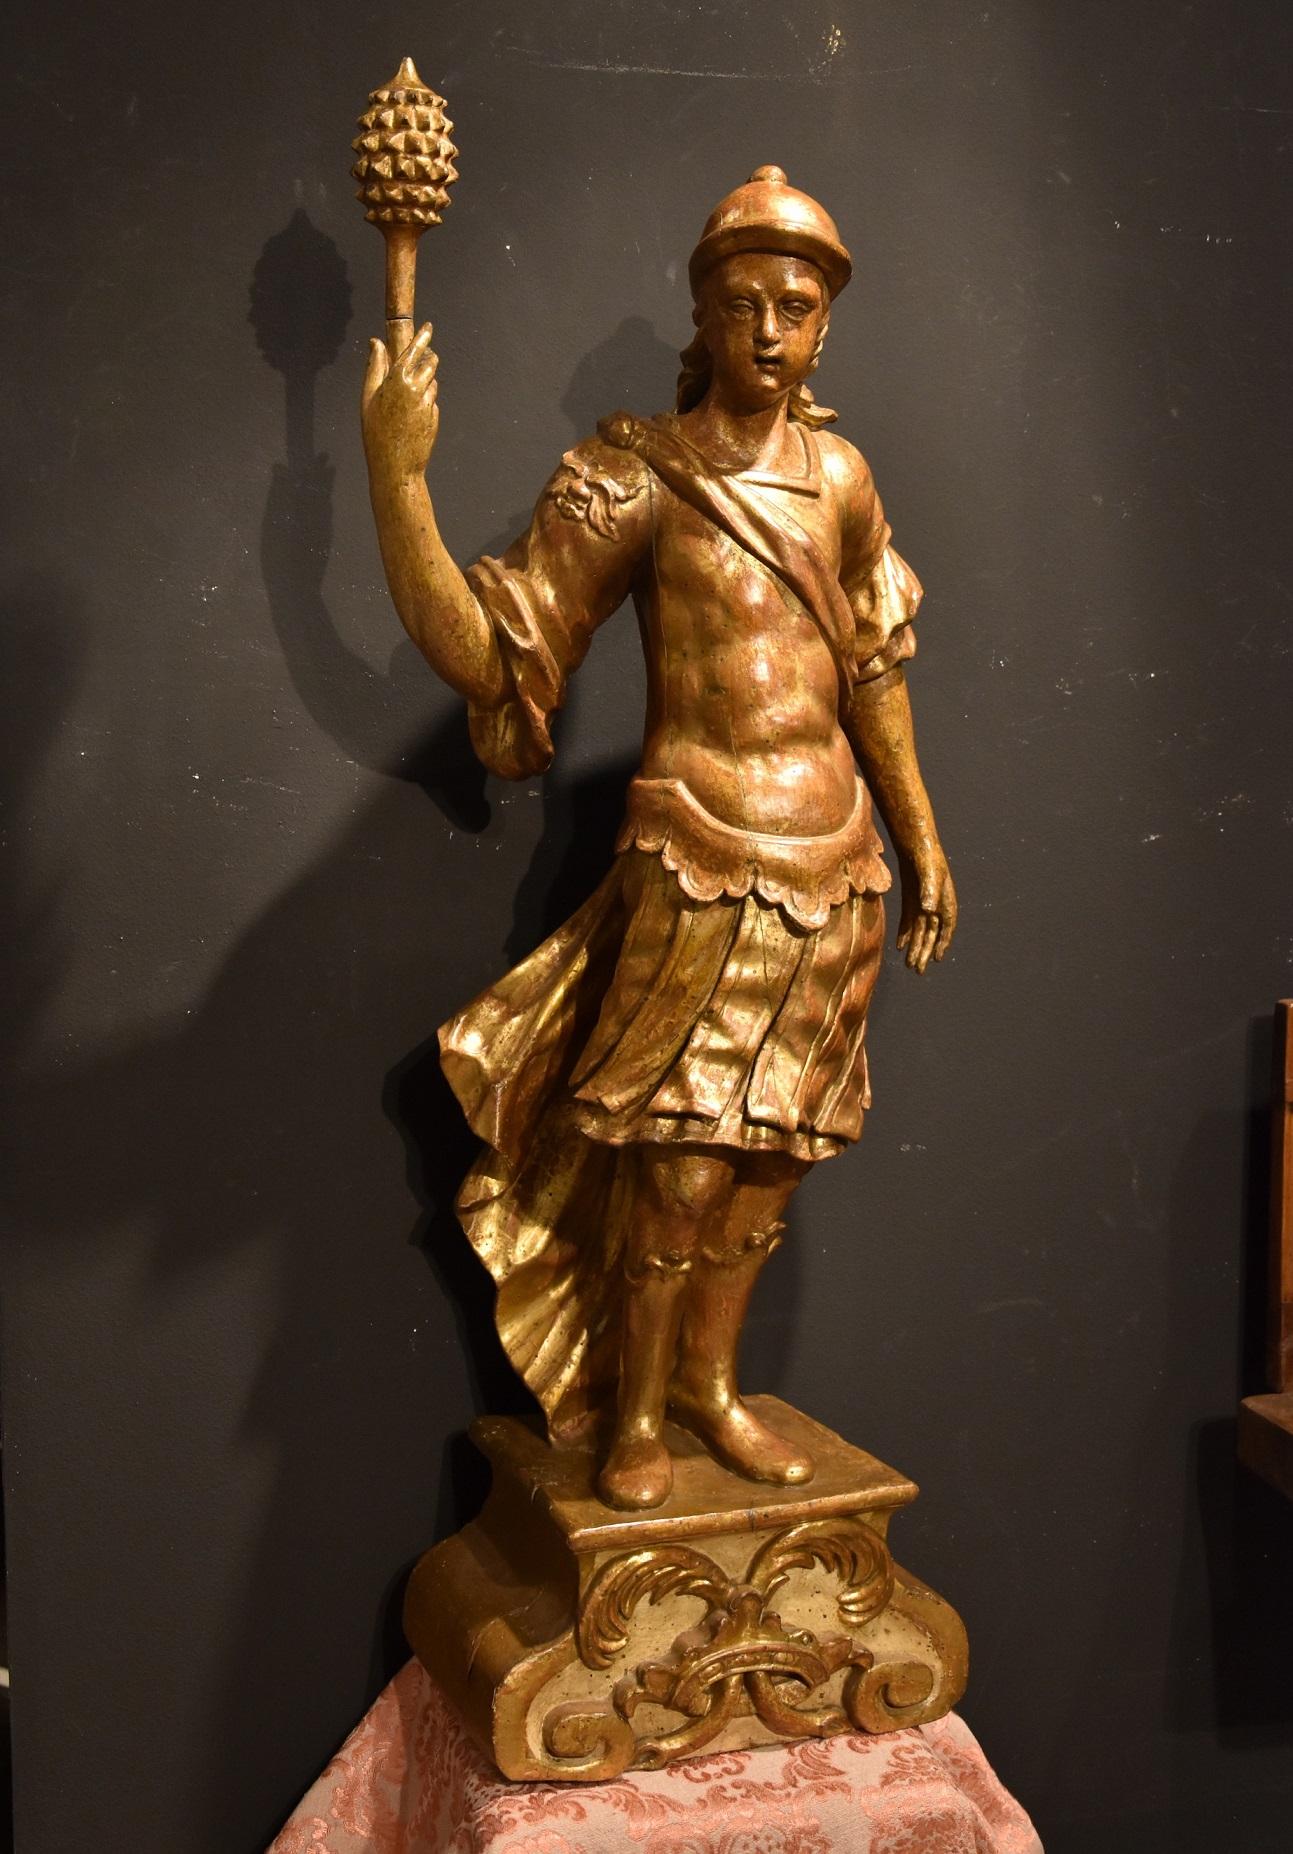 Venetian Baroque sculptor of the 17th century Abstract Sculpture - Venetian Sculpture 17th Century Wood Italian Old master Soldier Roma War Gold